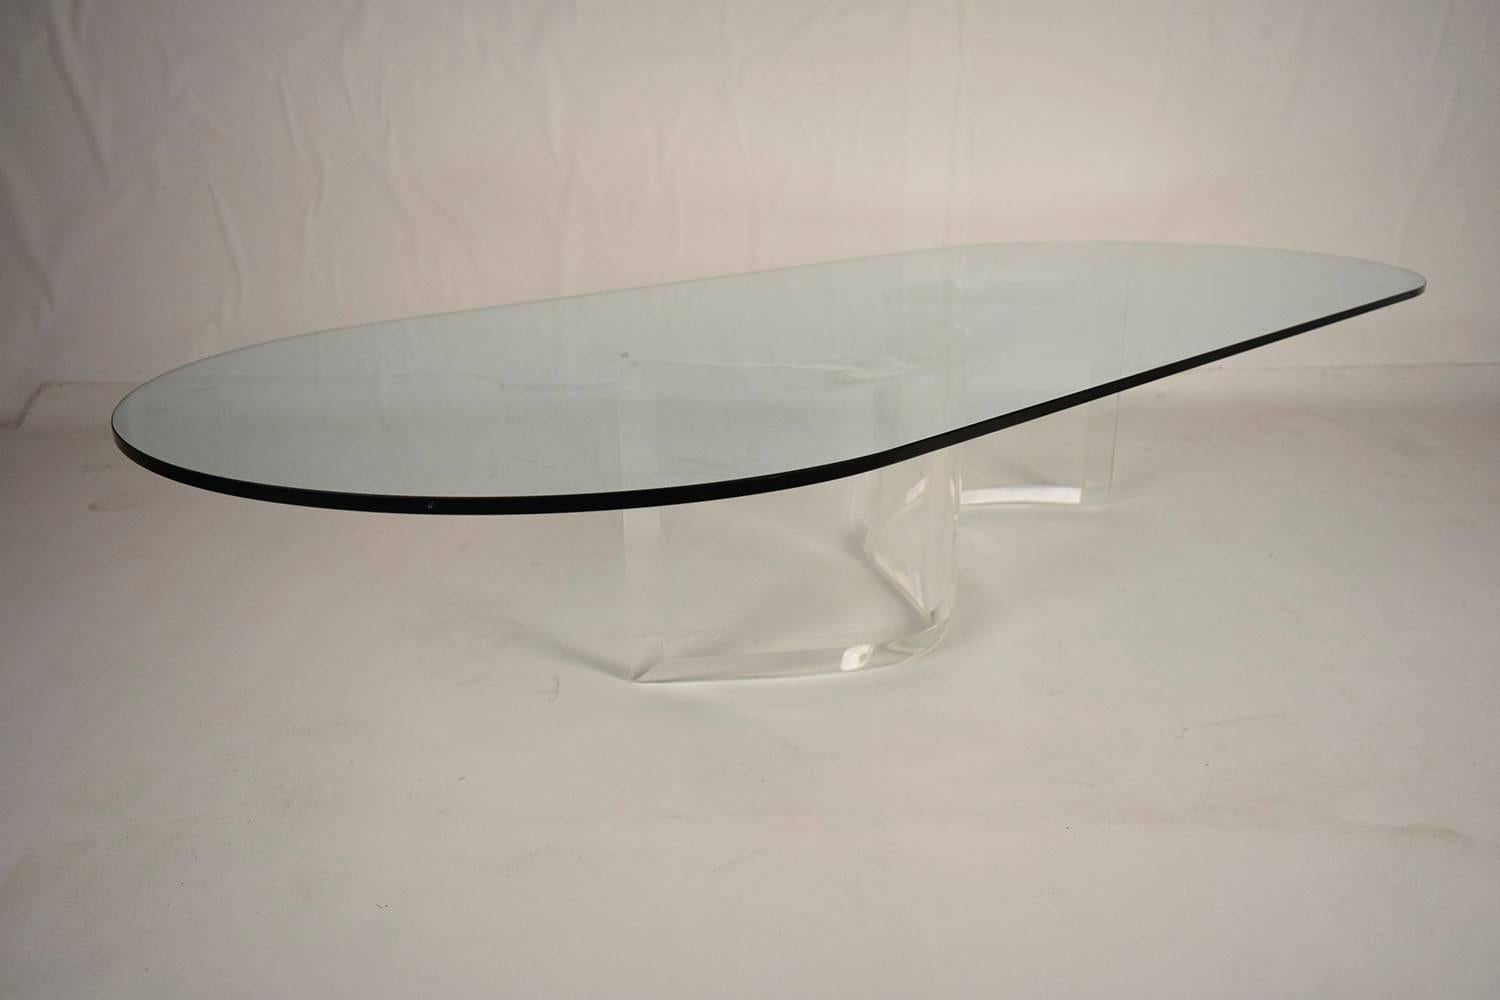 This 1970's Mid-Century Modern coffee table features an oval glass top with a Lucite S-shaped base. The glass top and clear lucite base allow for this coffee table to blend in with its surroundings while still drawing attention to itself. This